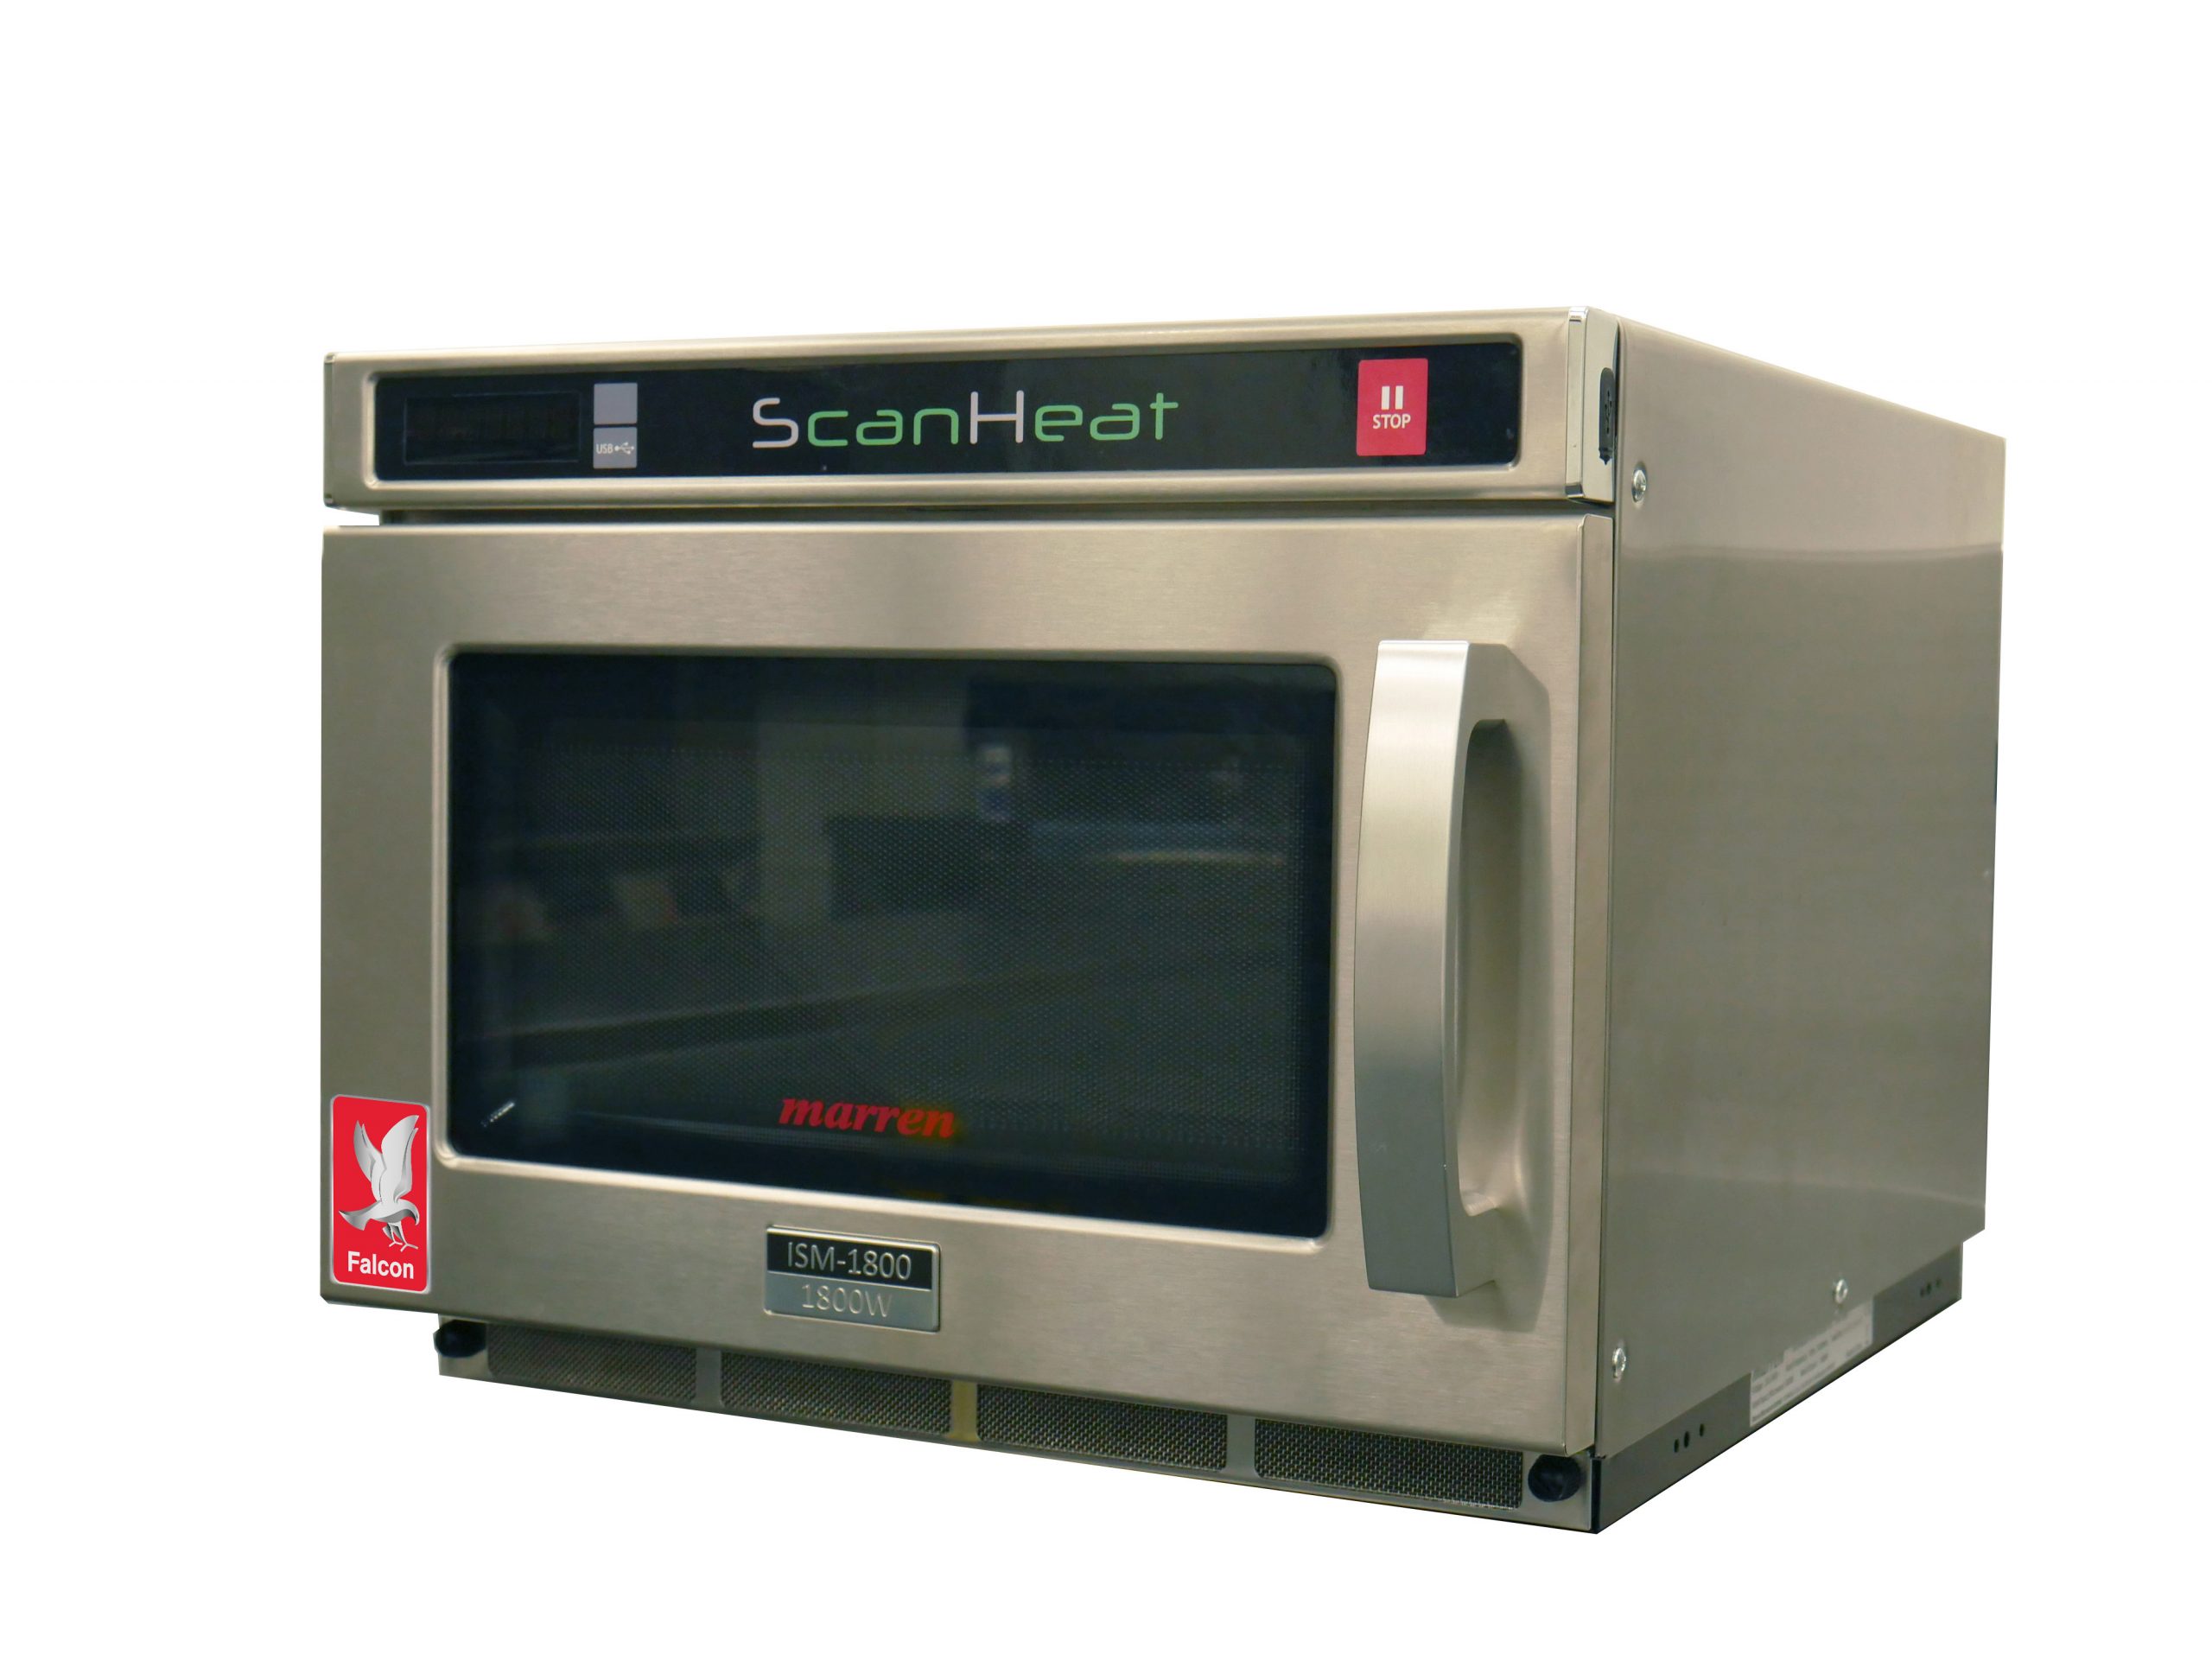 Scan-Heat-Eat: Falcon teams up with Marren to launch the ScanHeat microwave